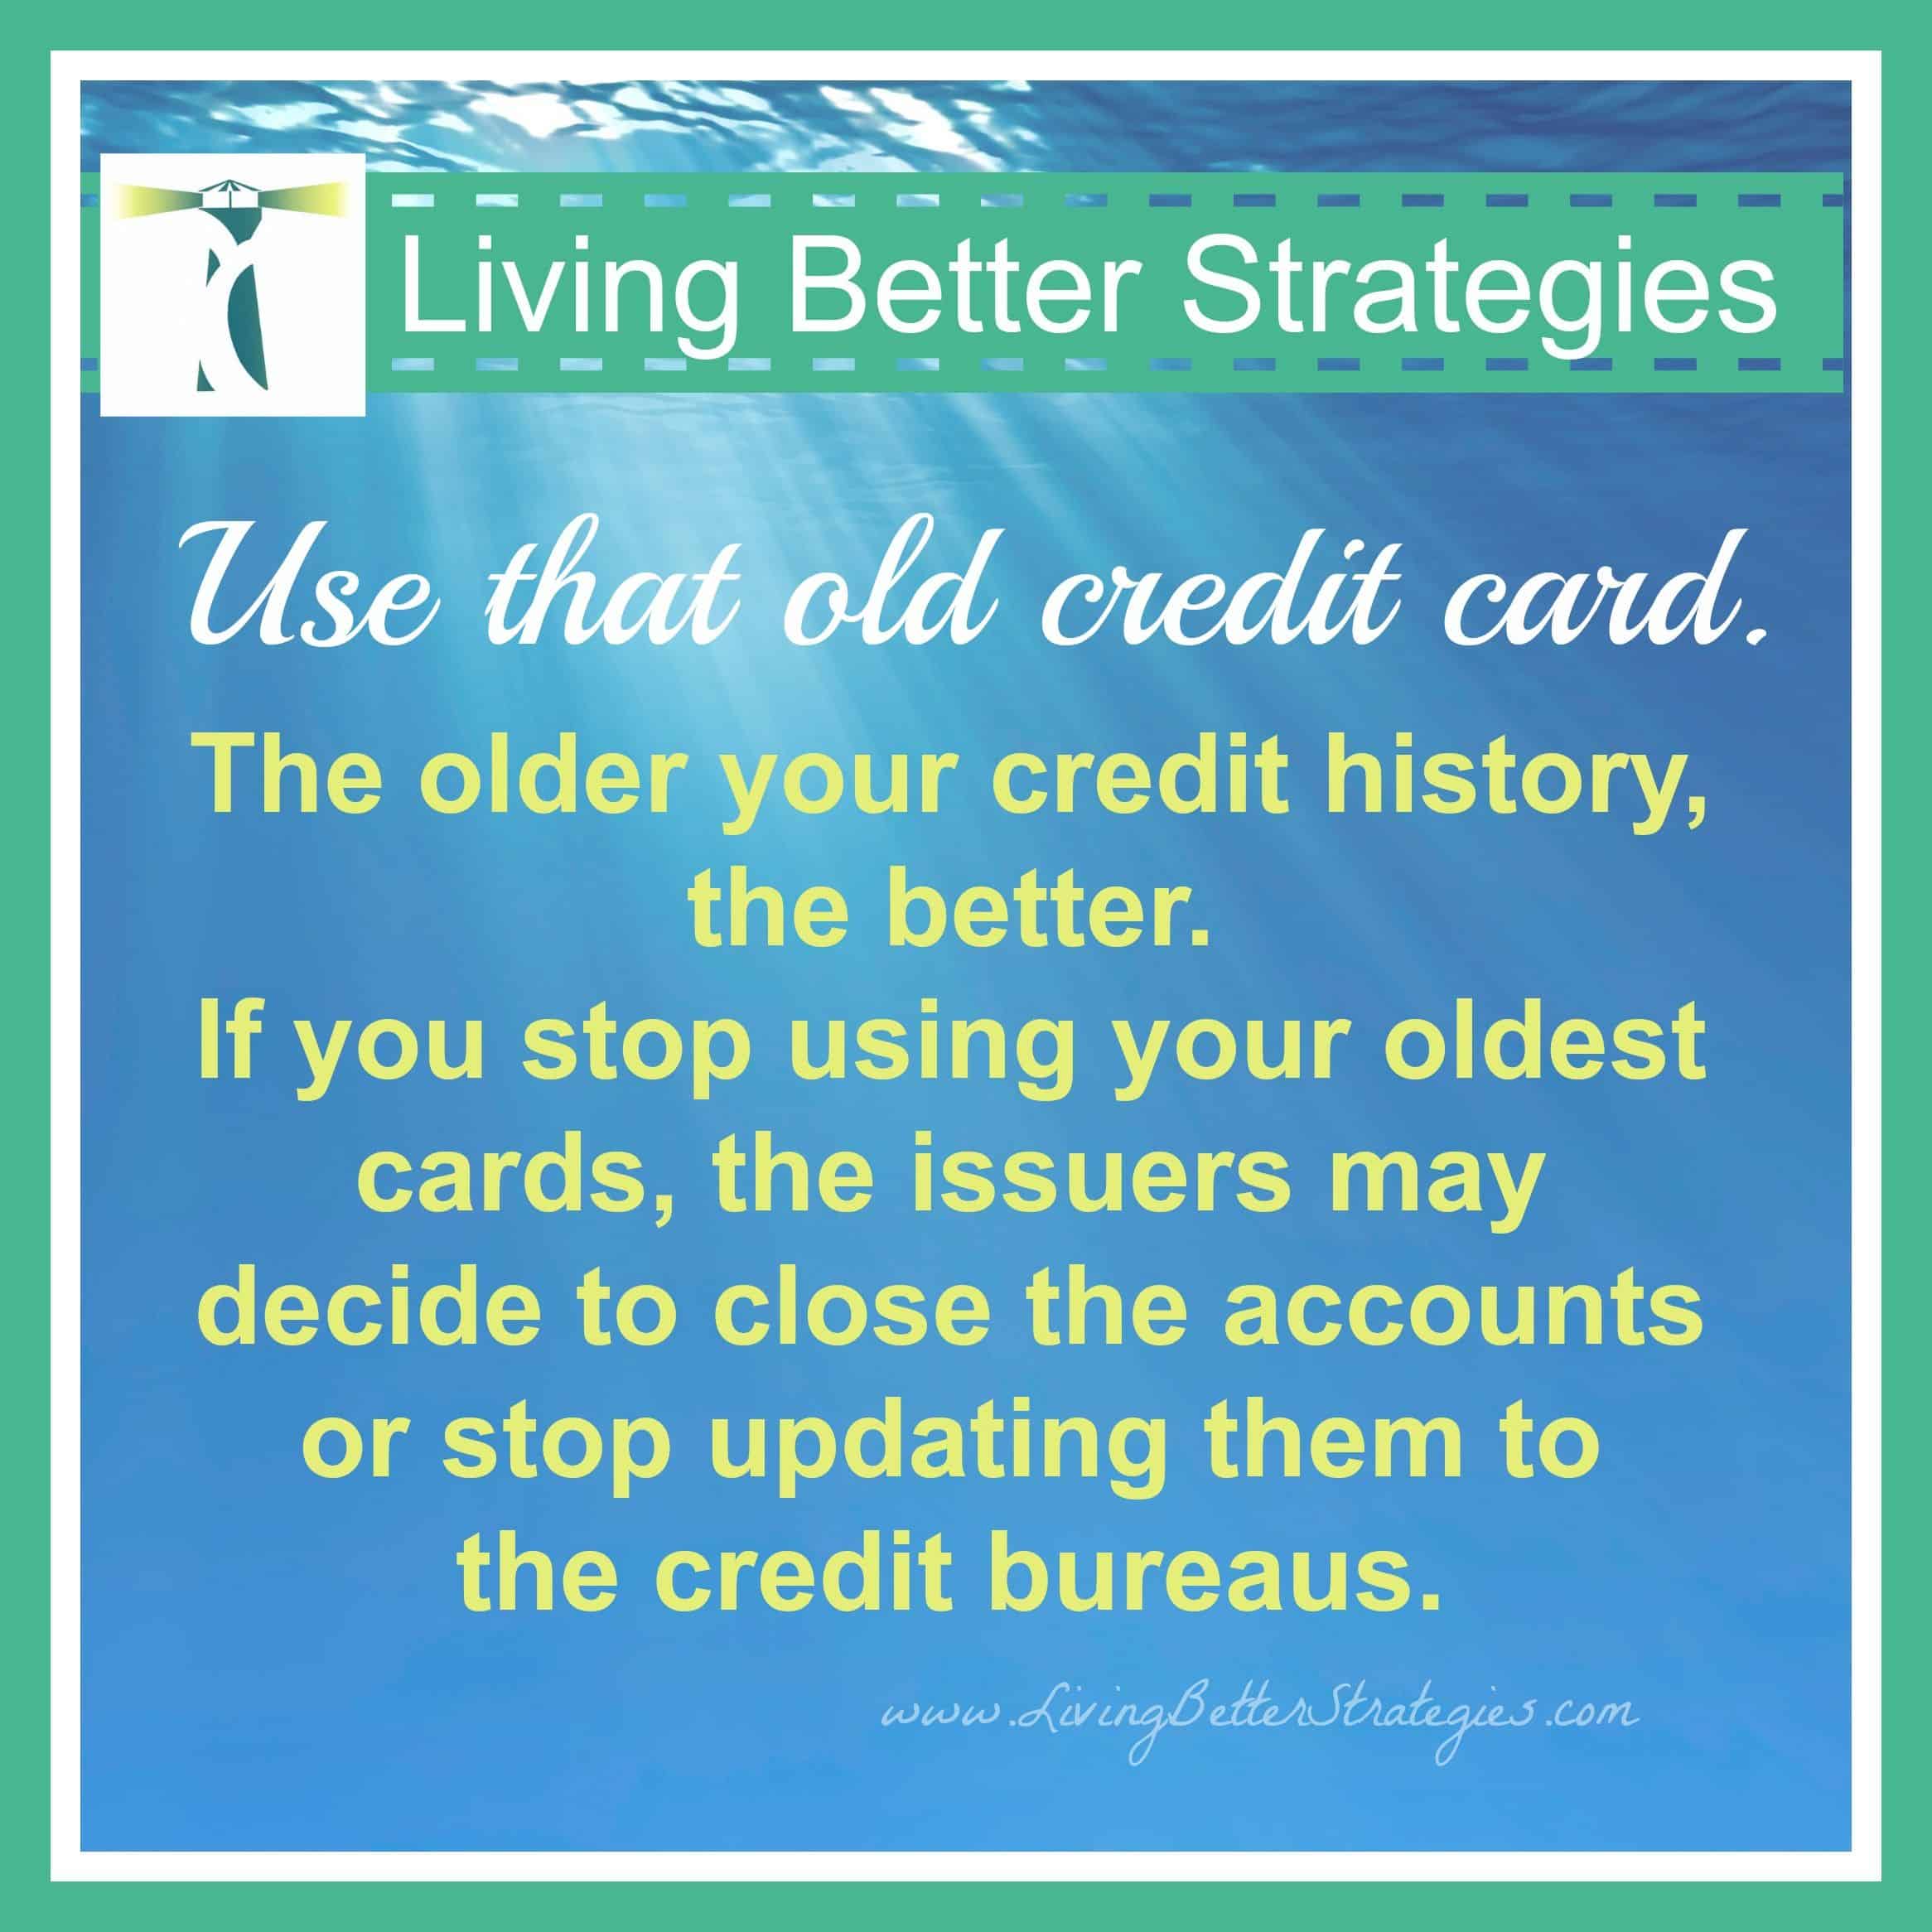 Use your old credit card.